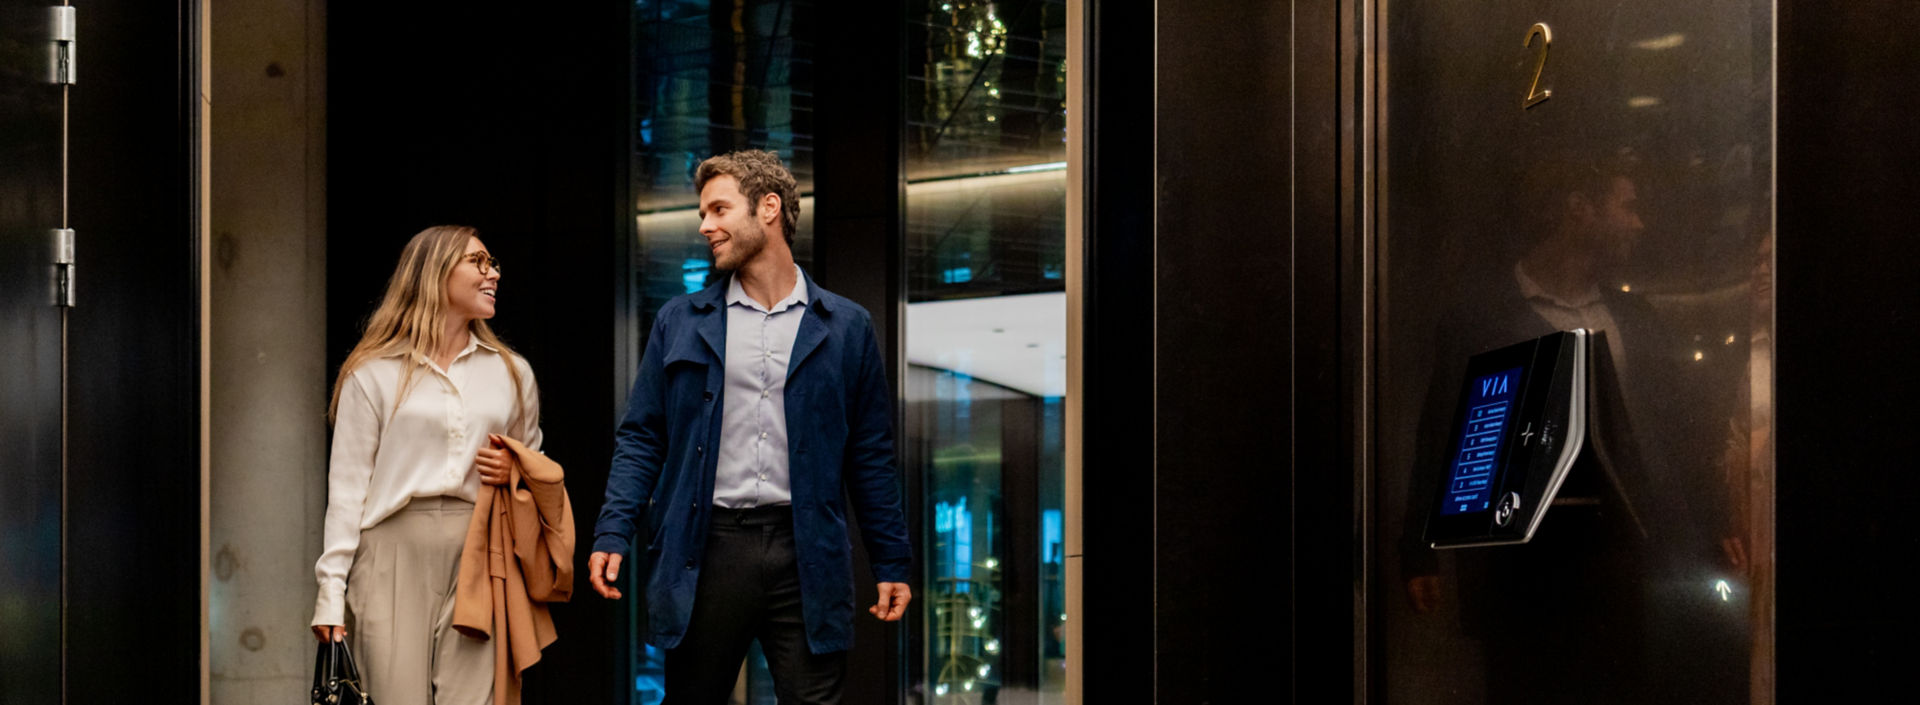 A man and a woman in casual business wear walk towards an elevator while talking happily.